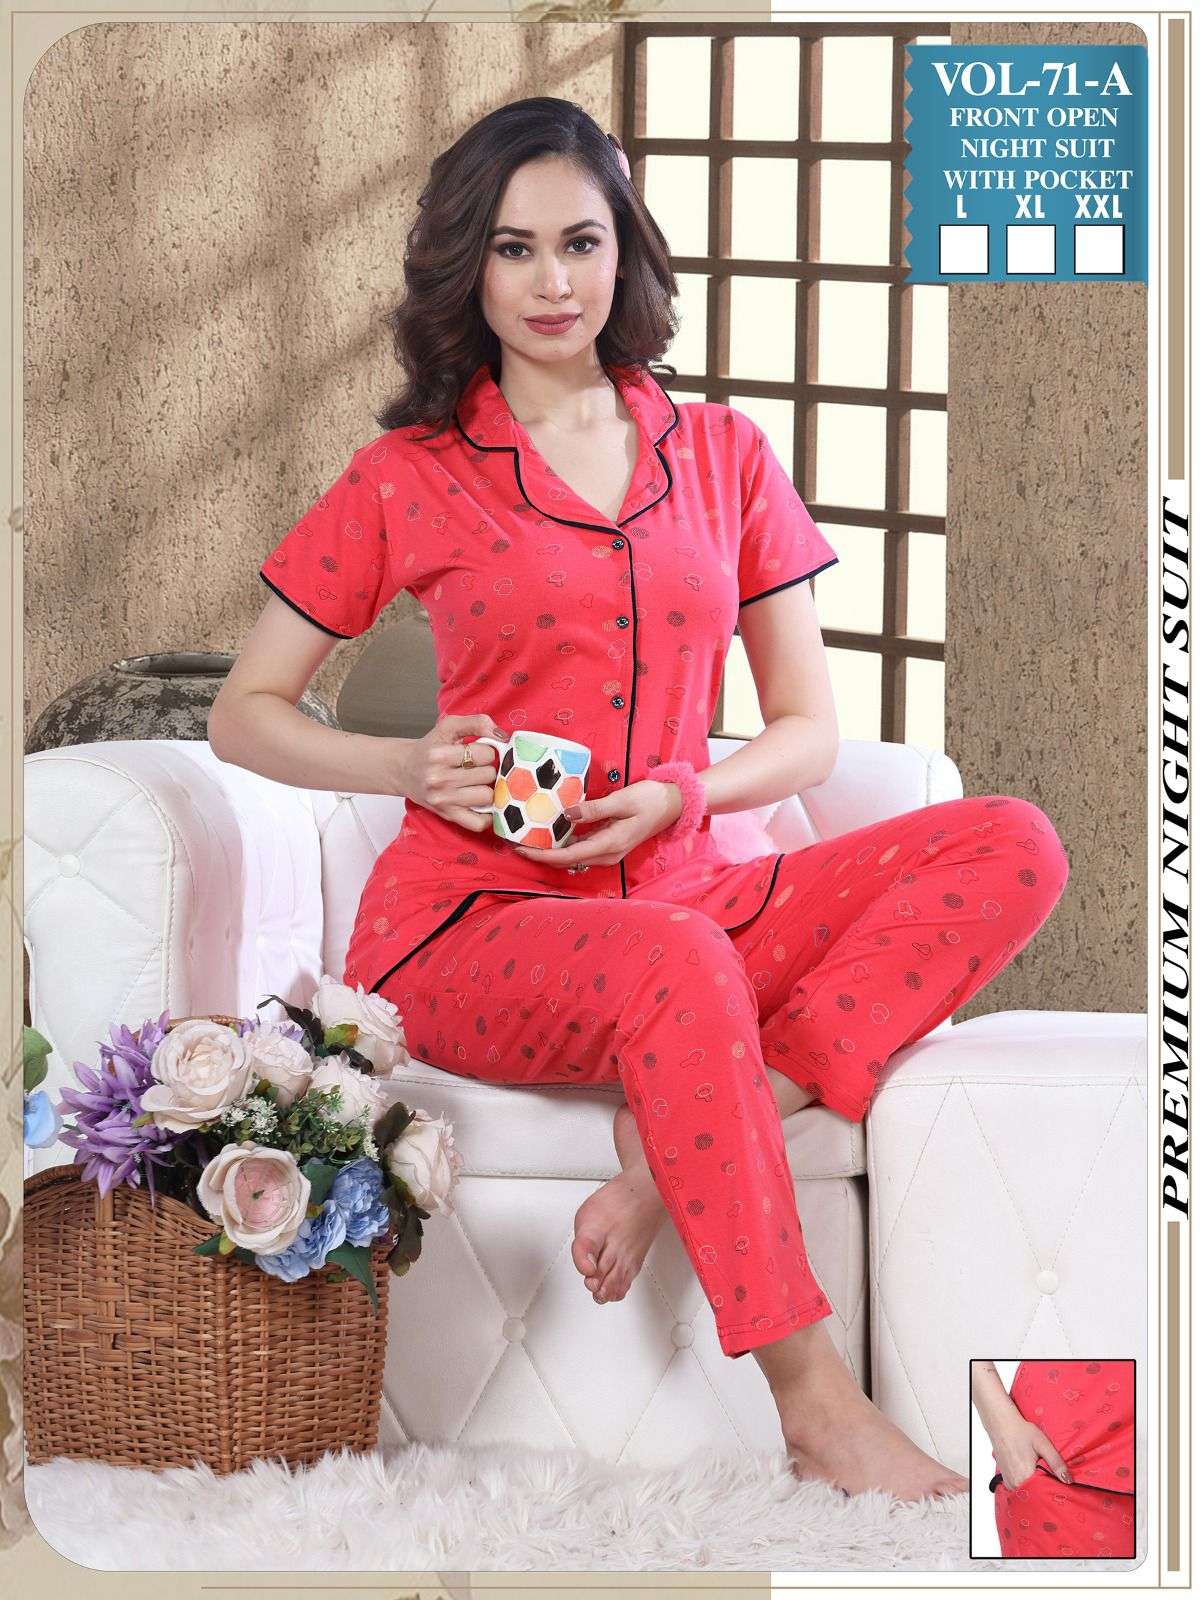 SUMMER SPECIAL C.NS VOL.71 A Heavy Shinker Hosiery Cotton NIGHT SUIT CATALOG WHOLESALER BEST RATE